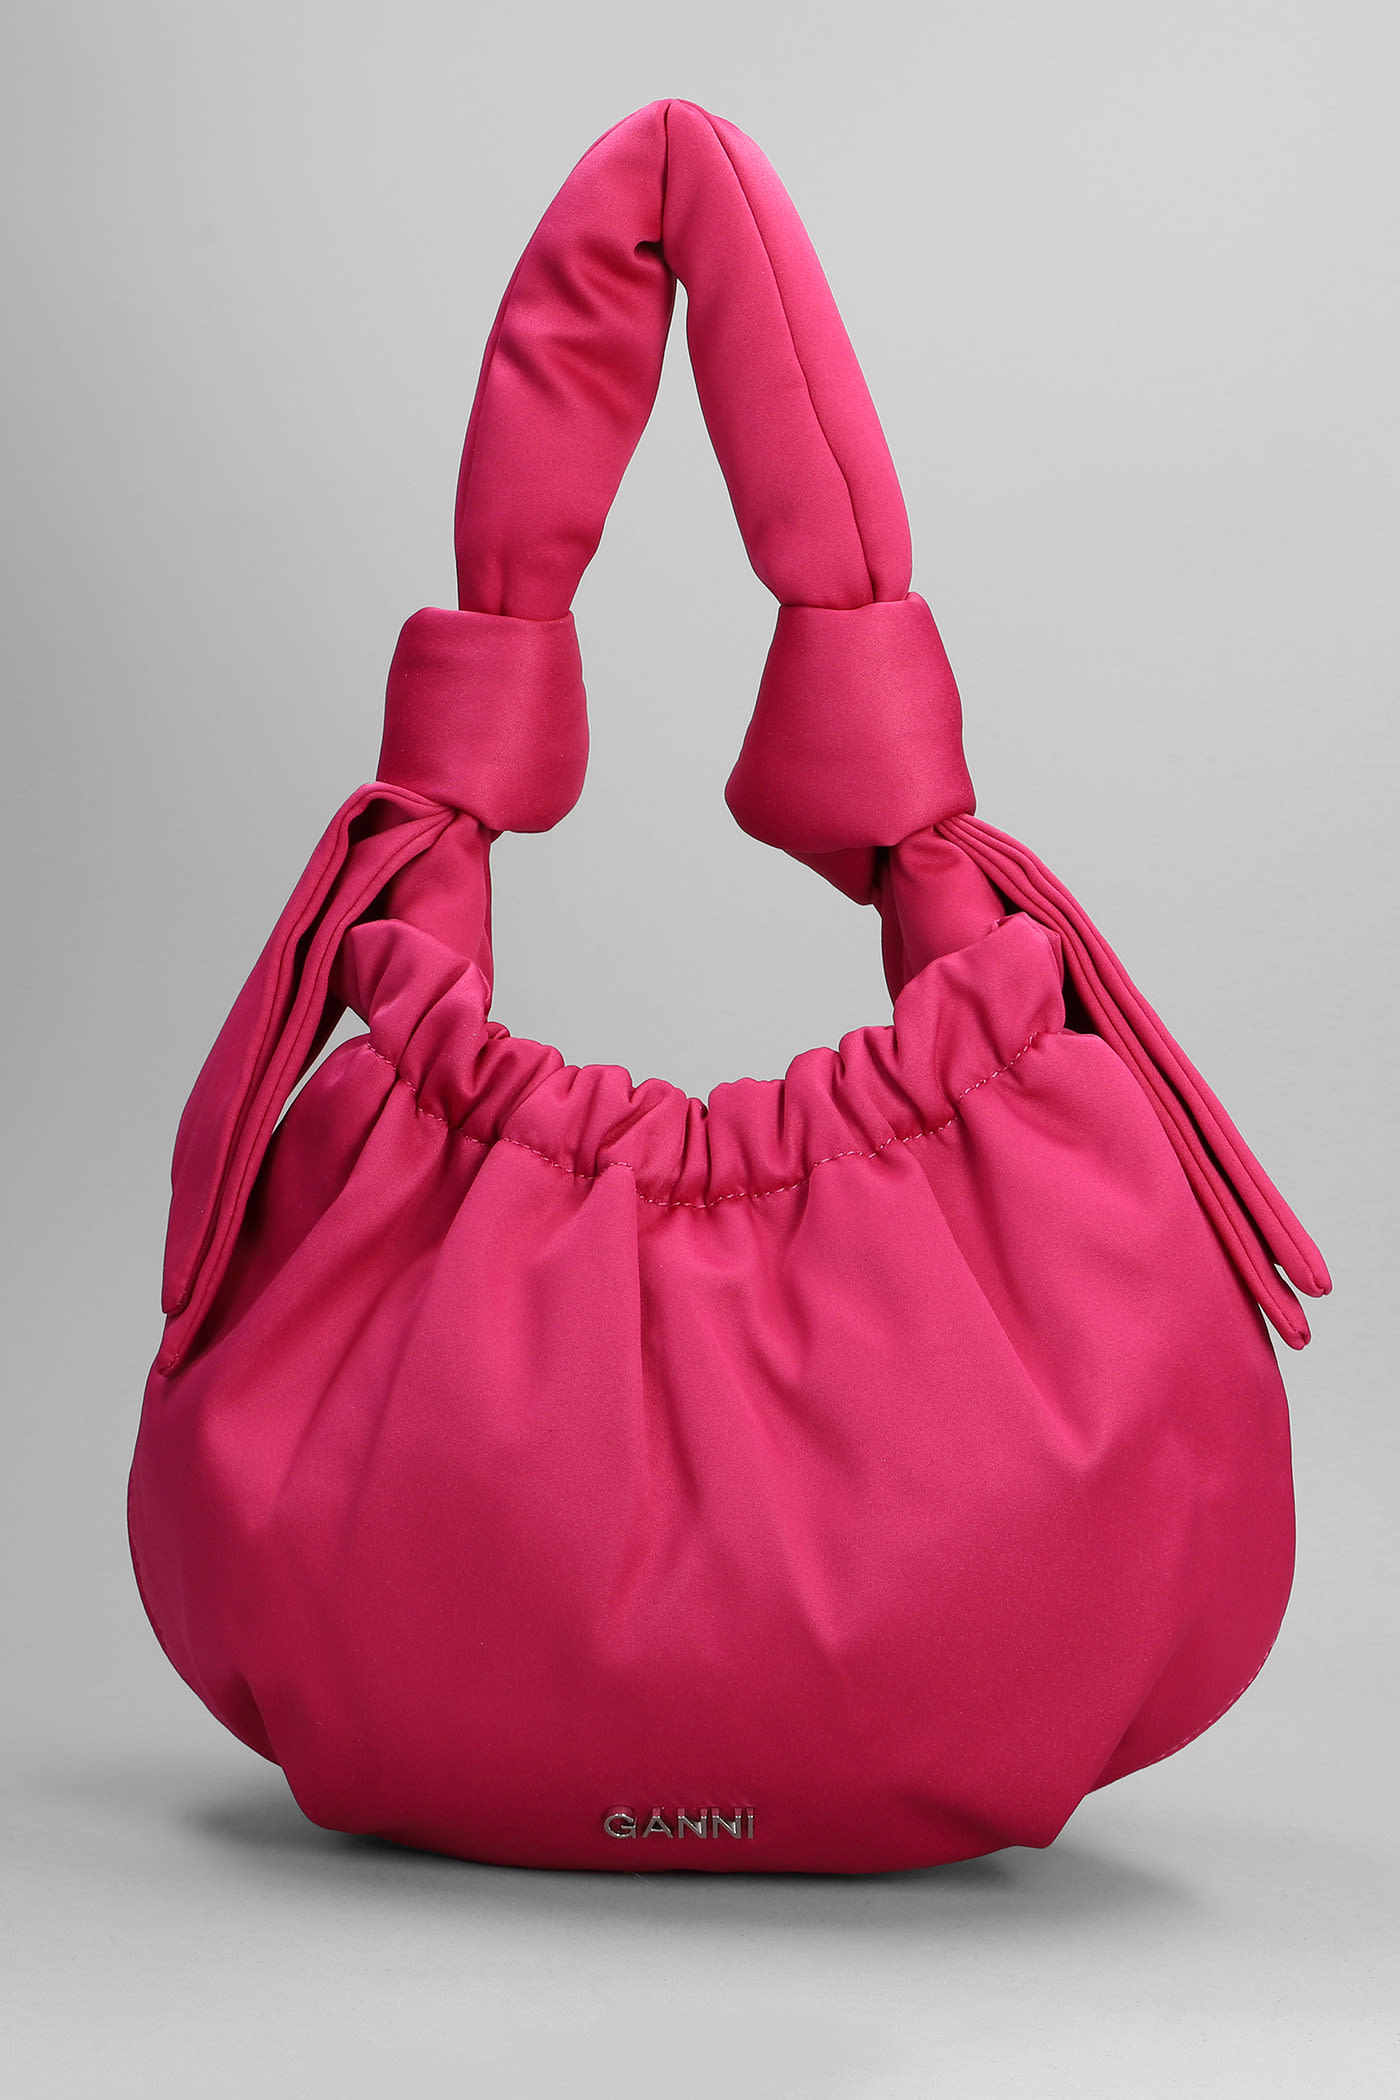 Ganni Hand Bag In Fuxia Polyester